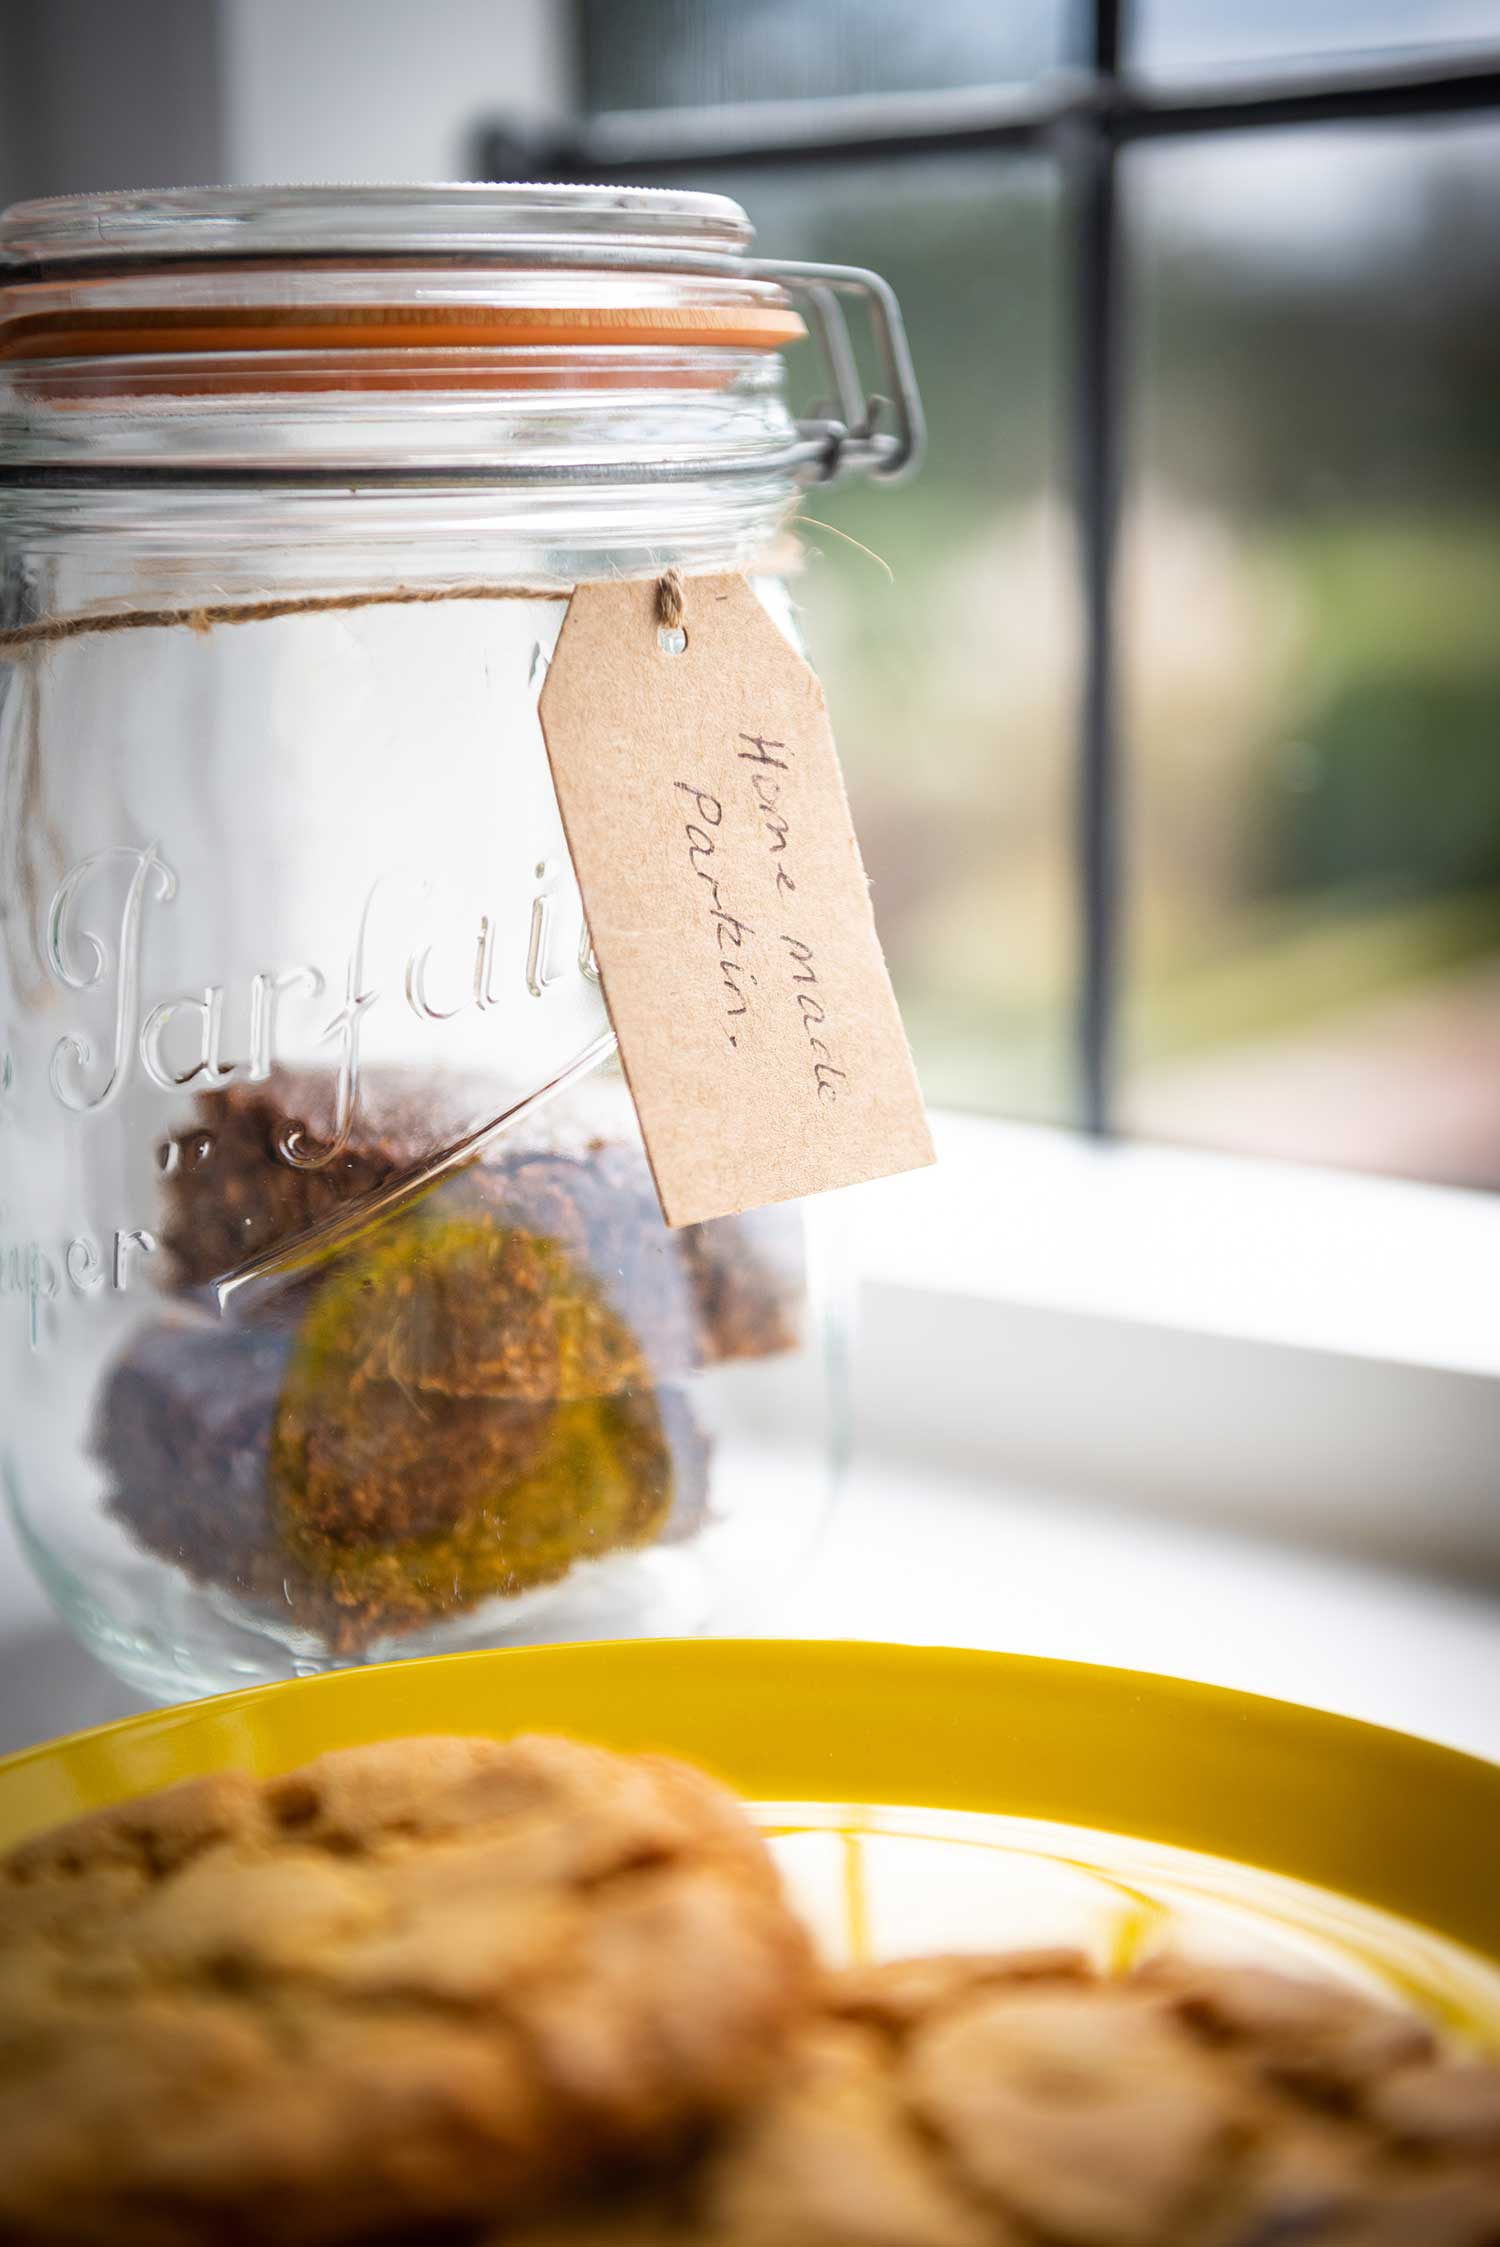 Jar containing home made parkin and cookies